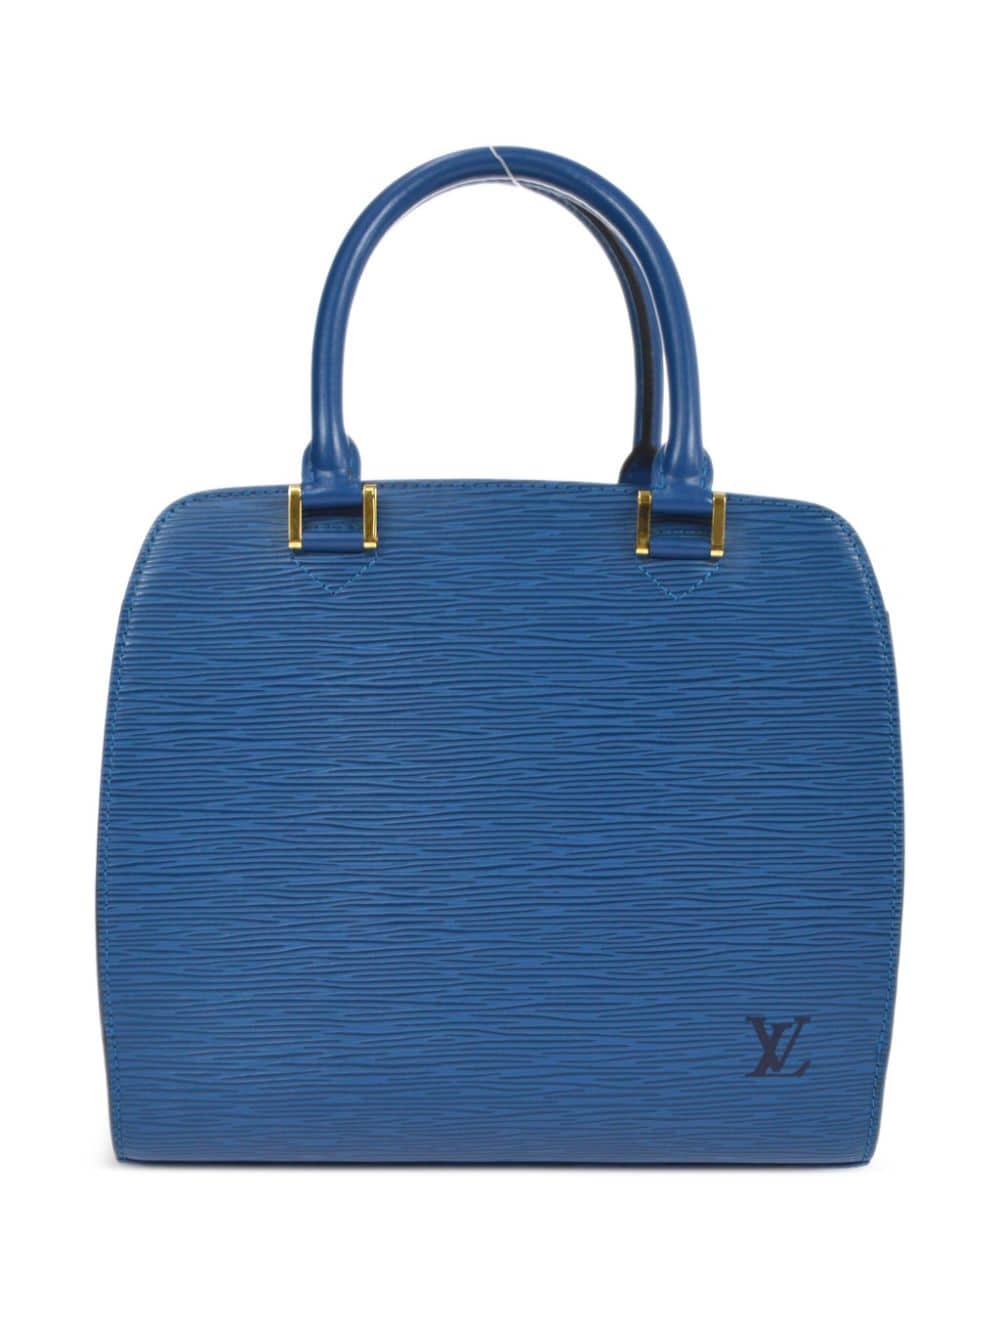 Pre-owned Louis Vuitton 1997  Pont Neuf Handbag In Blue